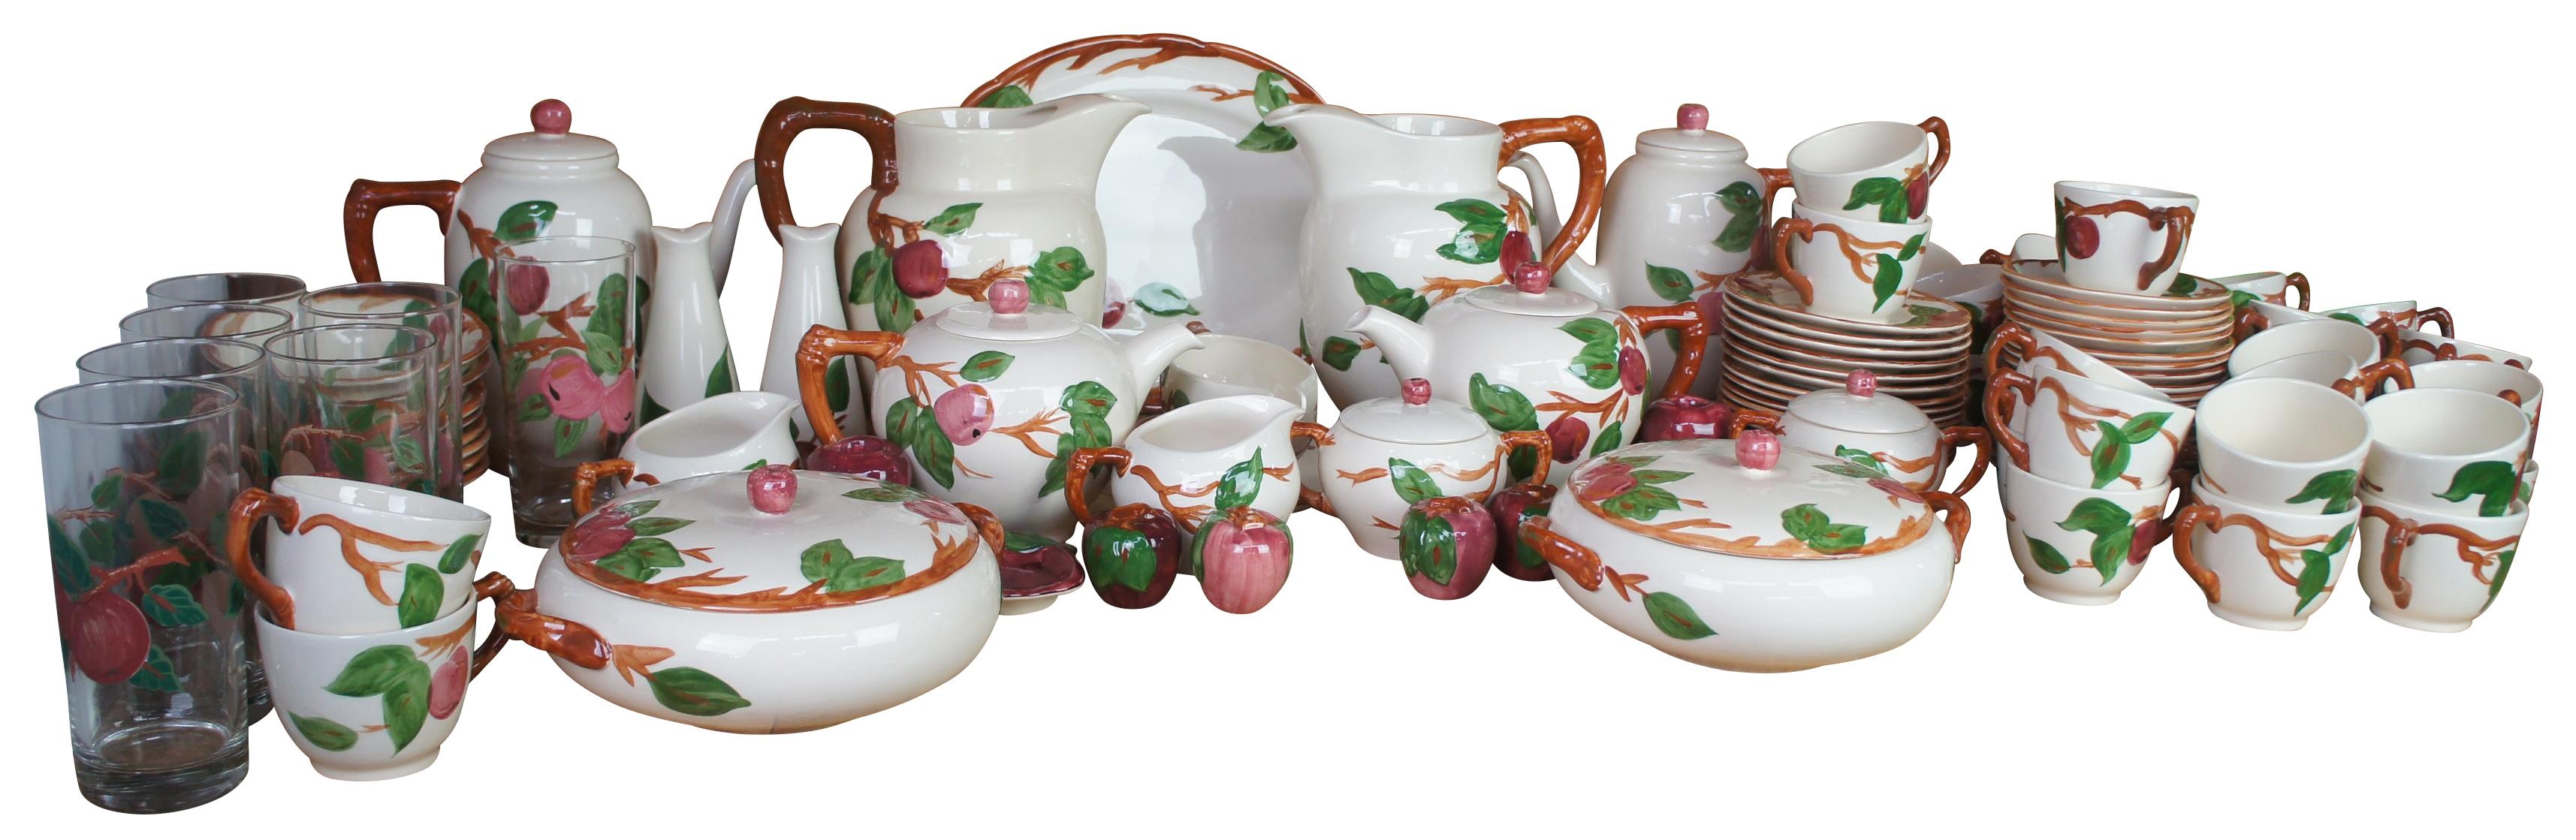 This vintage china set in the apple pattern by Franciscan has doubles of many pieces suitable for large gatherings. Includes 120 hand painted pieces. Made in England and USA

Measures: Platter- 14